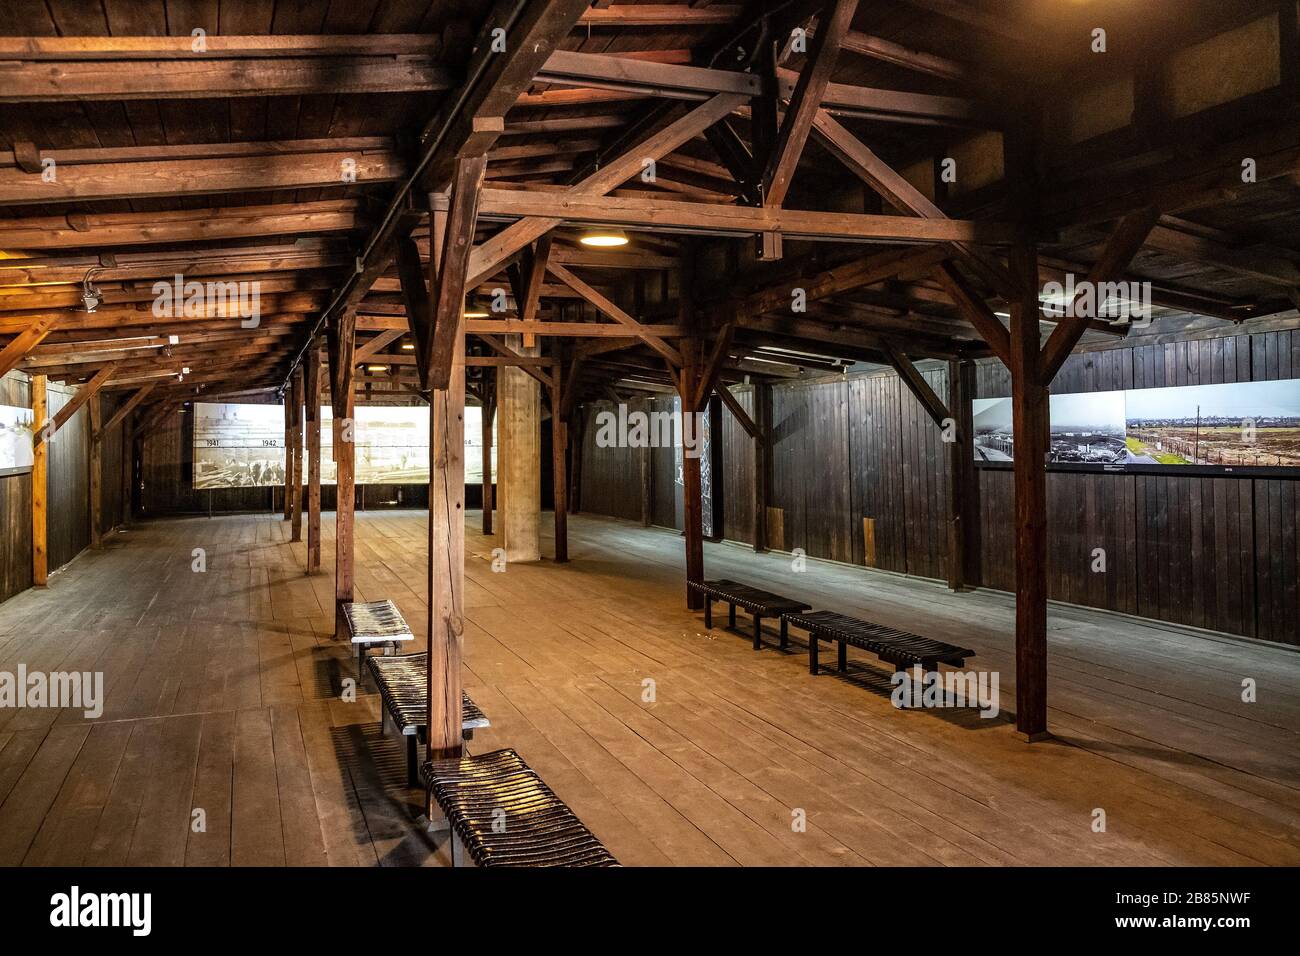 Lublin, Lubelskie / Poland - 2019/08/17: Interior of the prisoners’ barracks in Majdanek KL Lublin Nazis concentration and extermination camp Stock Photo